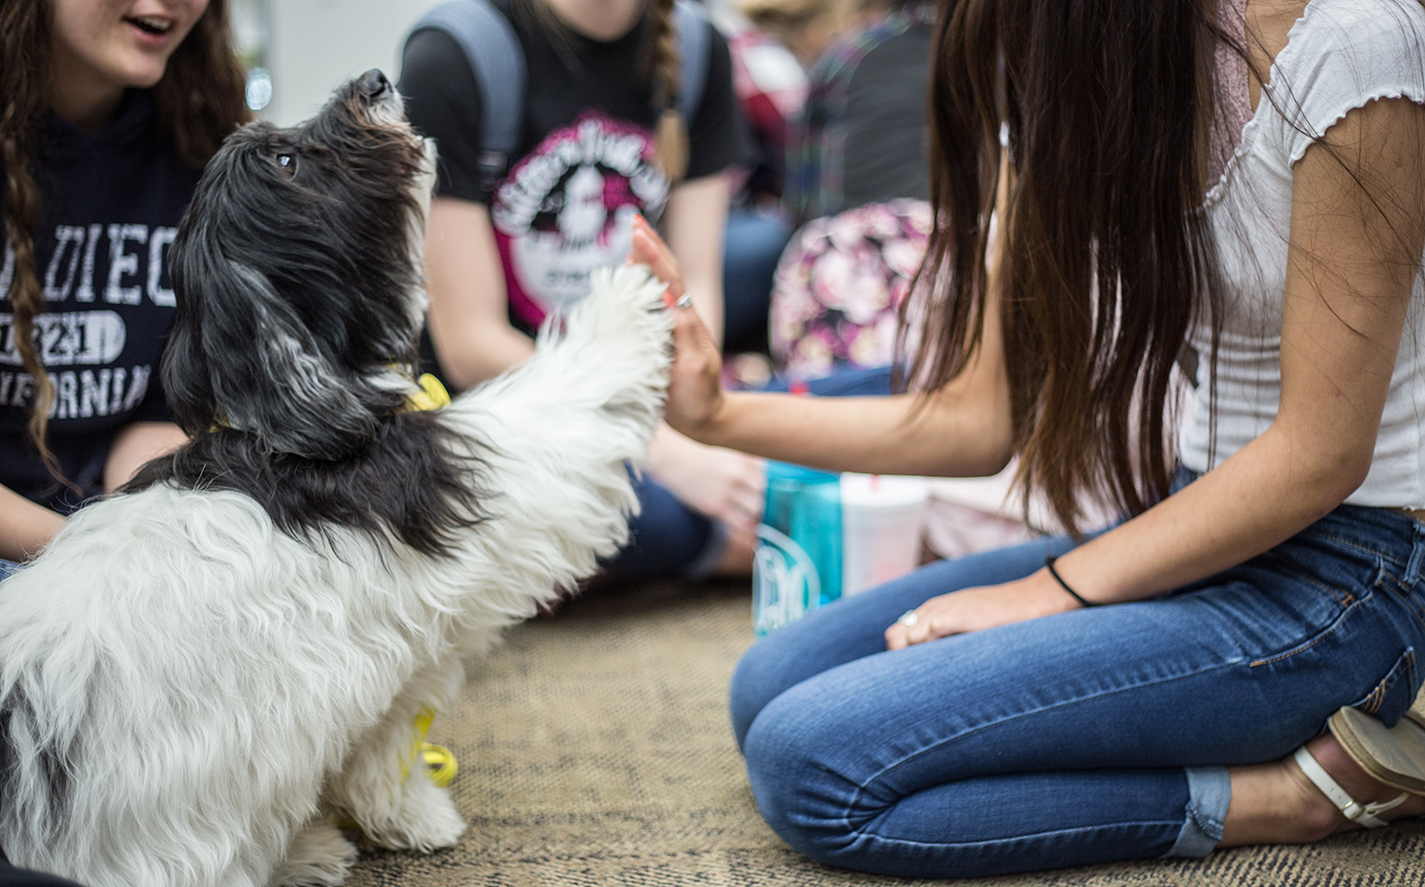 Mandie the dog high-fives NE student Nikki Bellinger during NE Campus’ Paws for Finals event April 30 in the campus’ library. Paws Across Texas Incorporated provided the therapy dogs for the students to relax as they prepare for finals. See more photos on page 7.